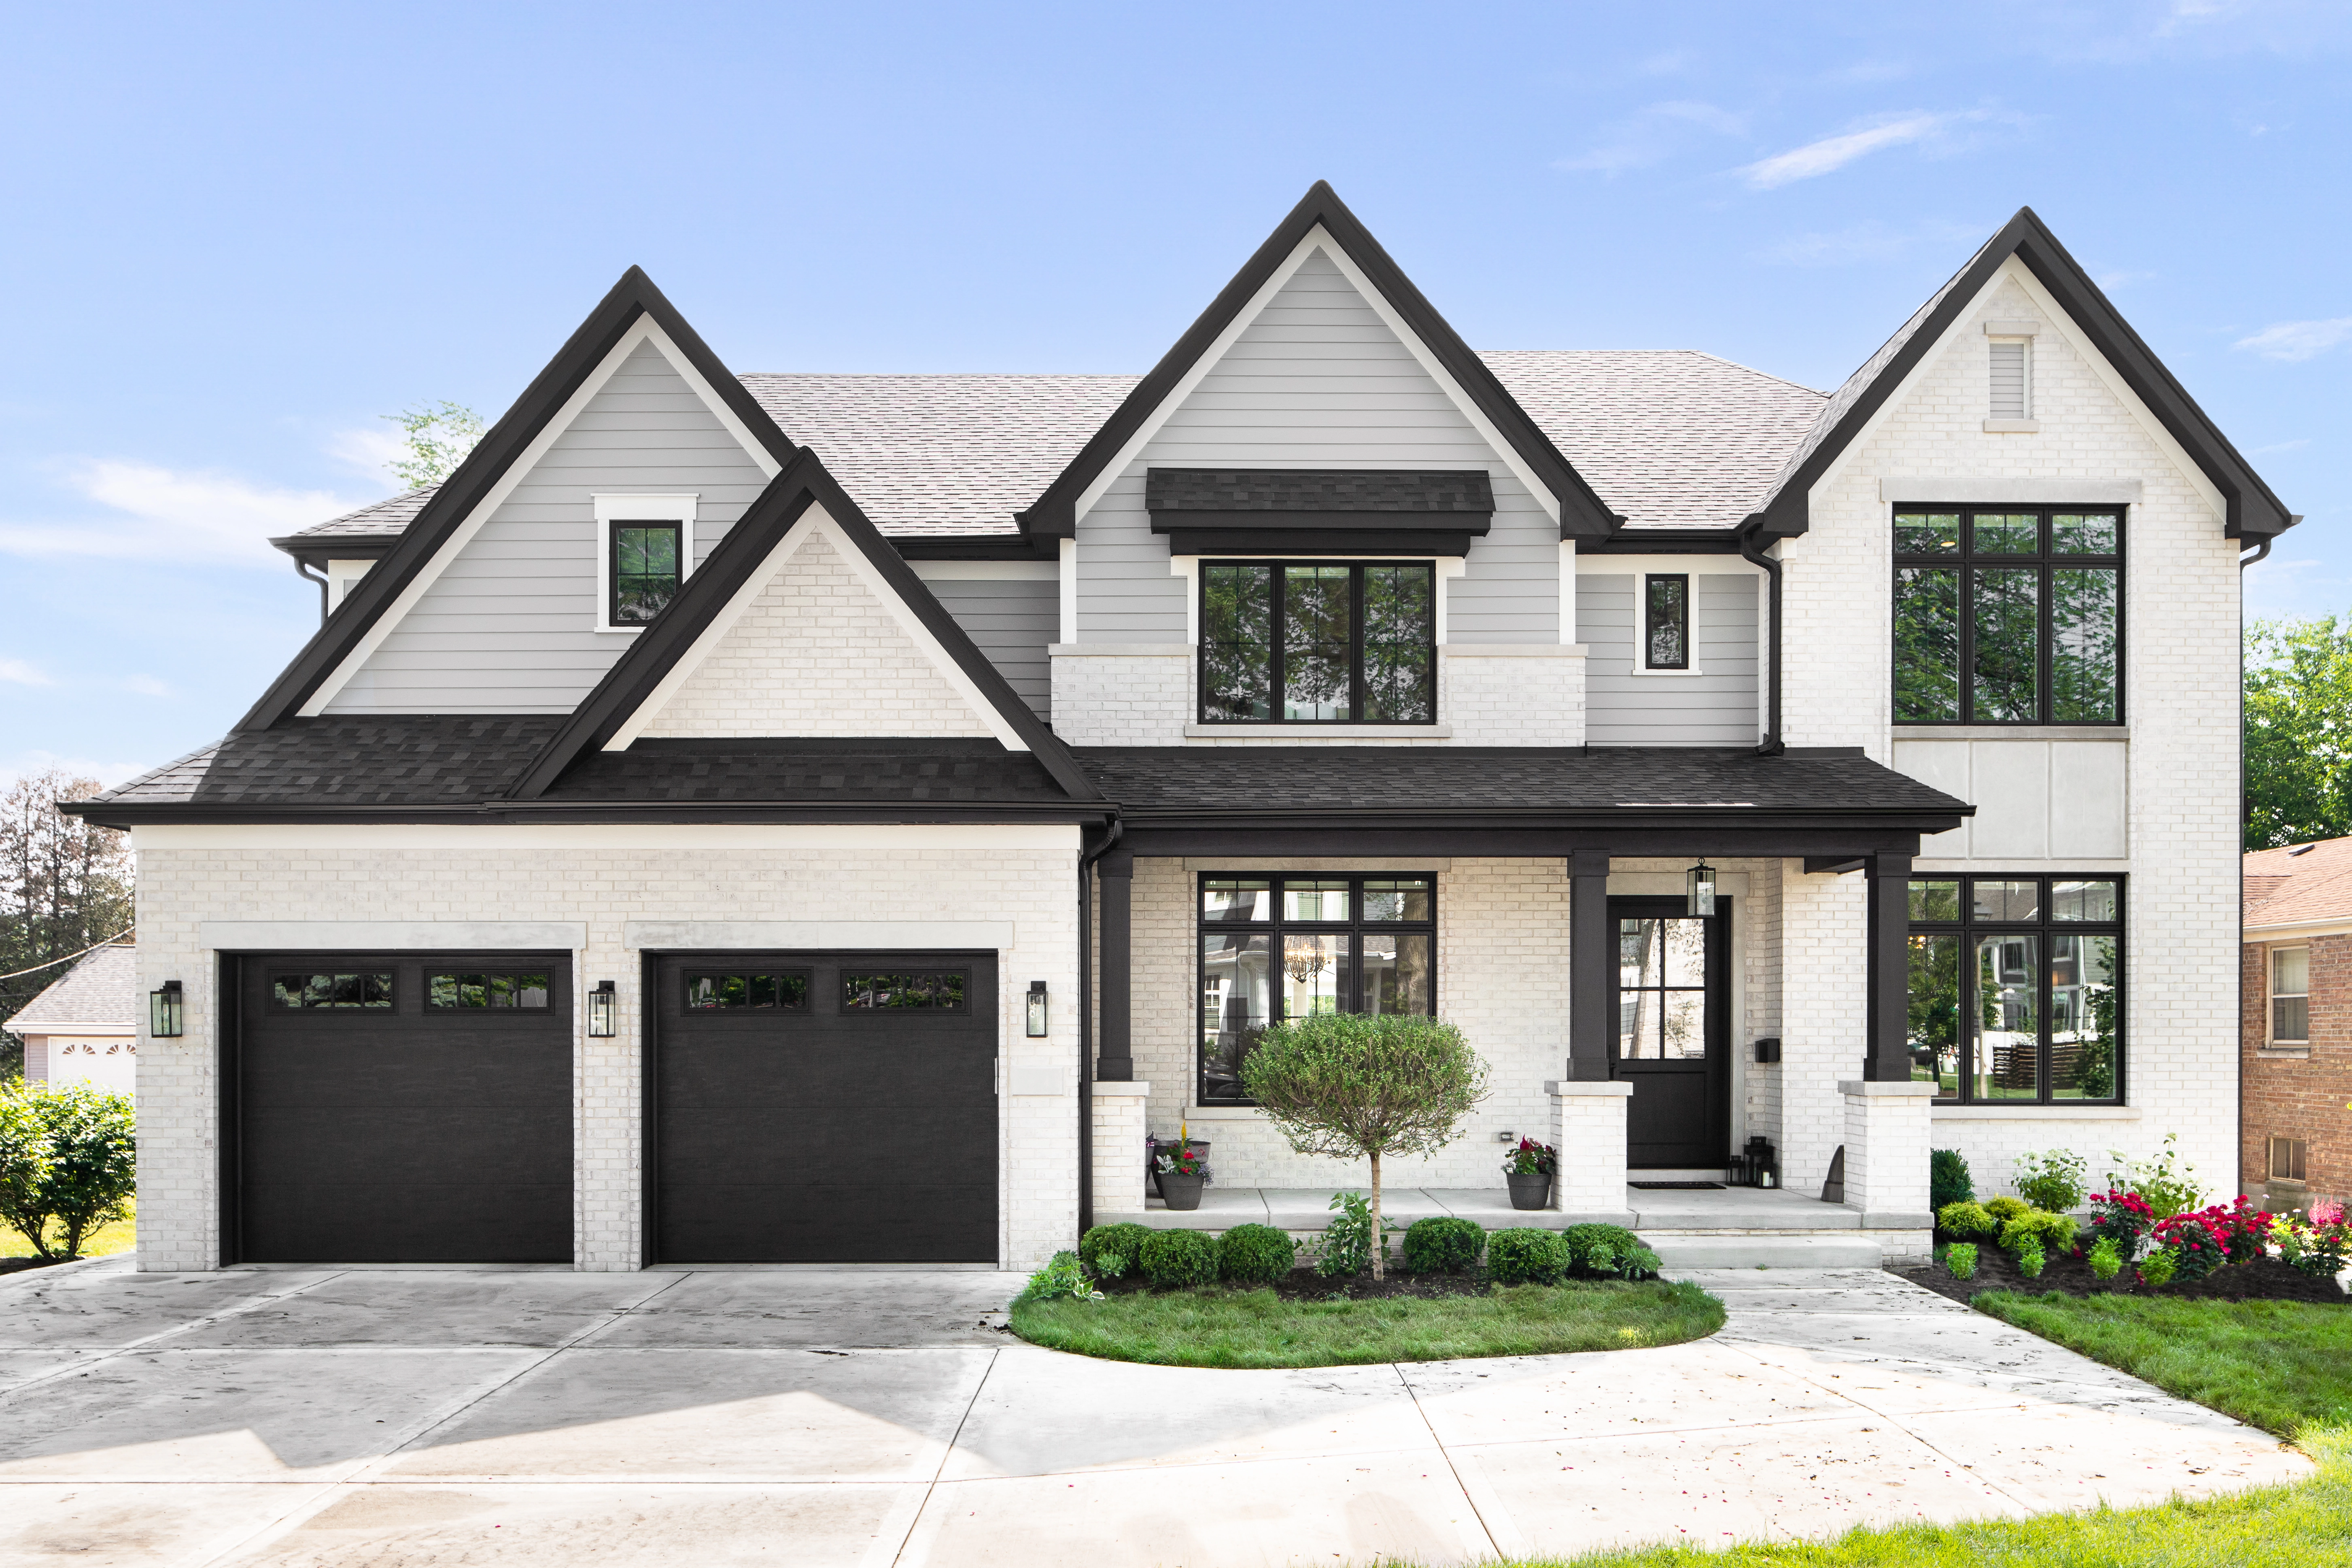 Modern farmhouse with white painted brick, gray vinyl siding, and black trim and doors.